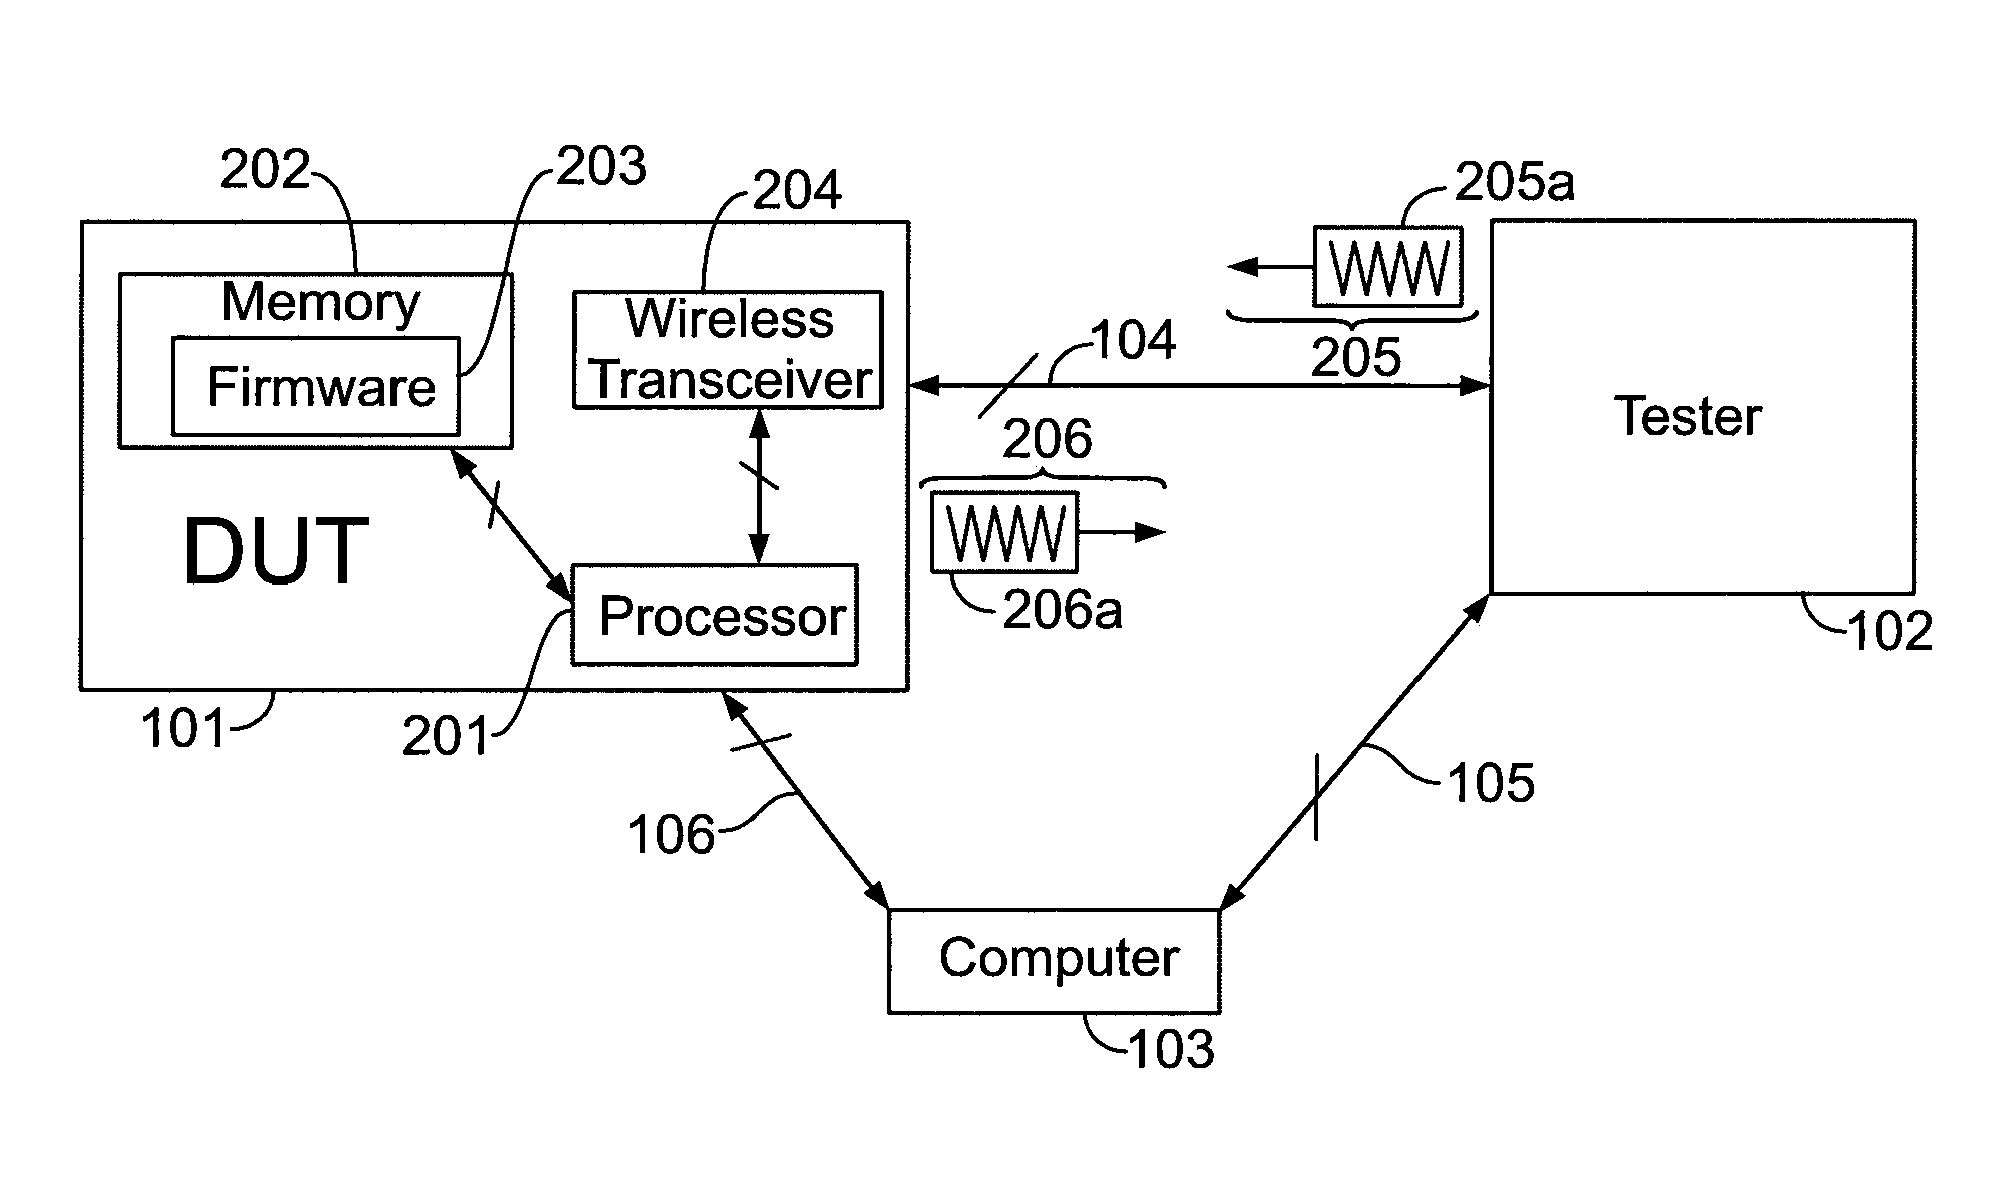 Method for testing wireless devices using predefined test segments initiated by over-the-air signal characteristics